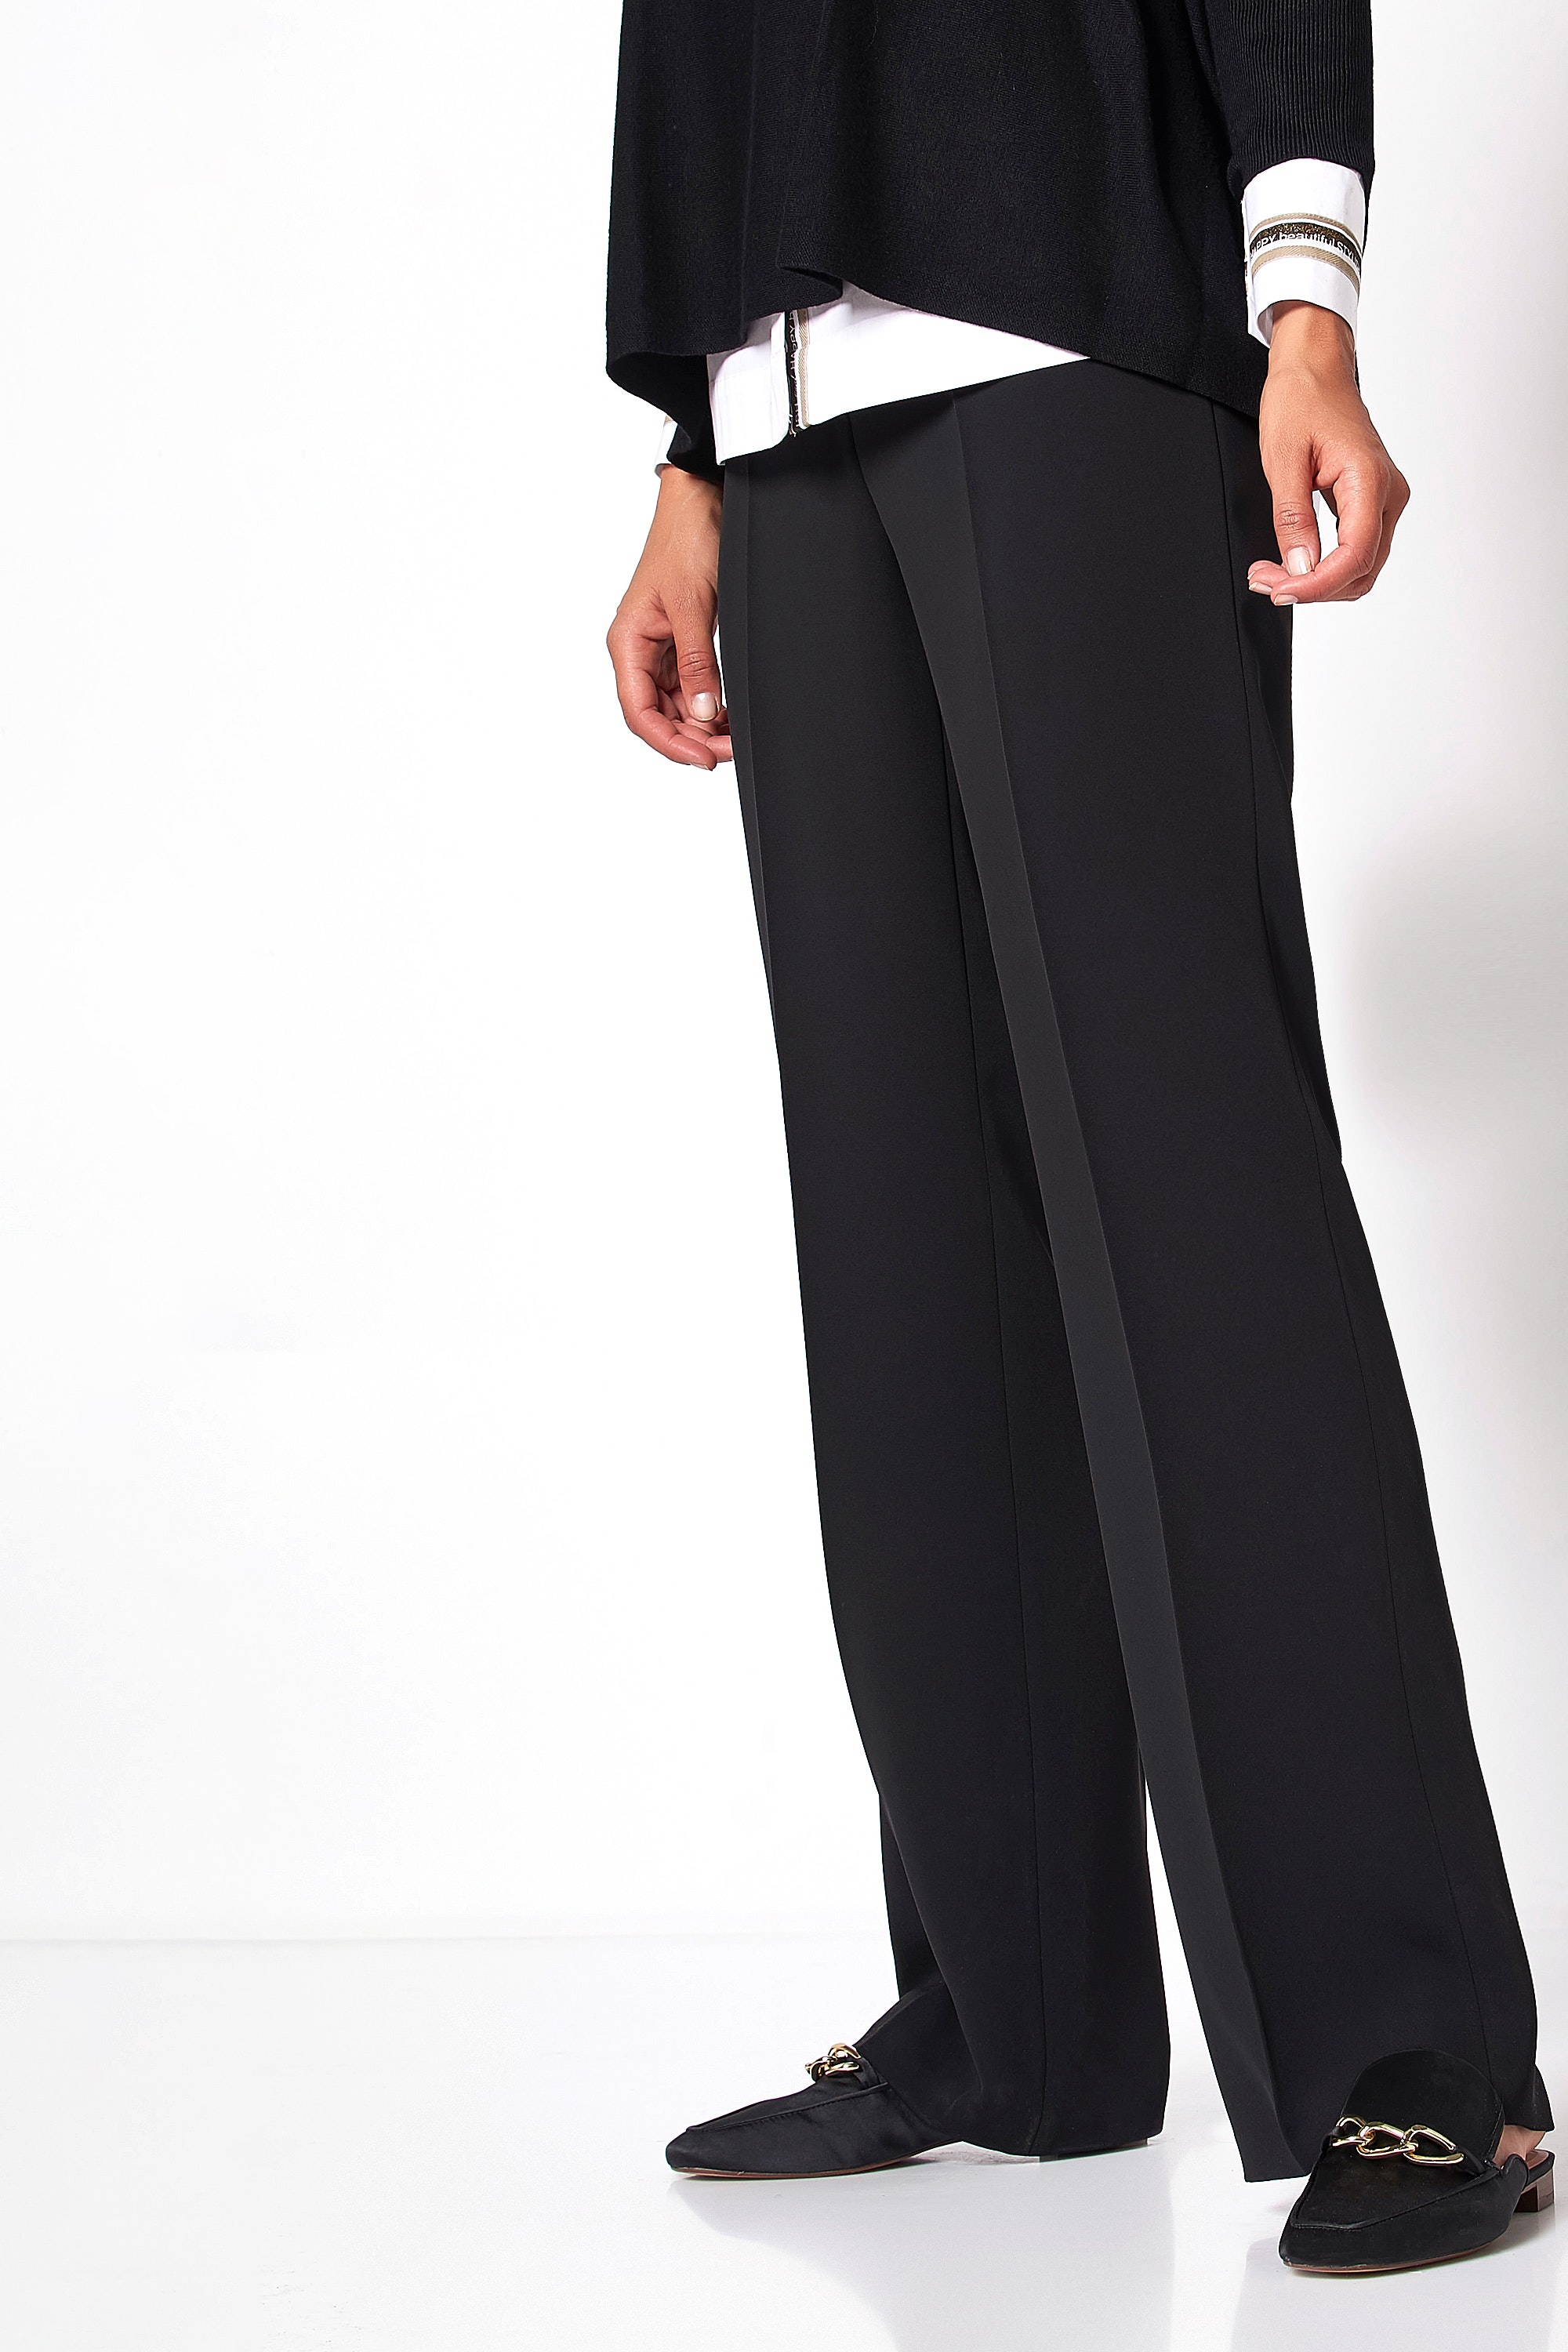 RELAXED BY TONI Damenhose Steffi Slim Fit